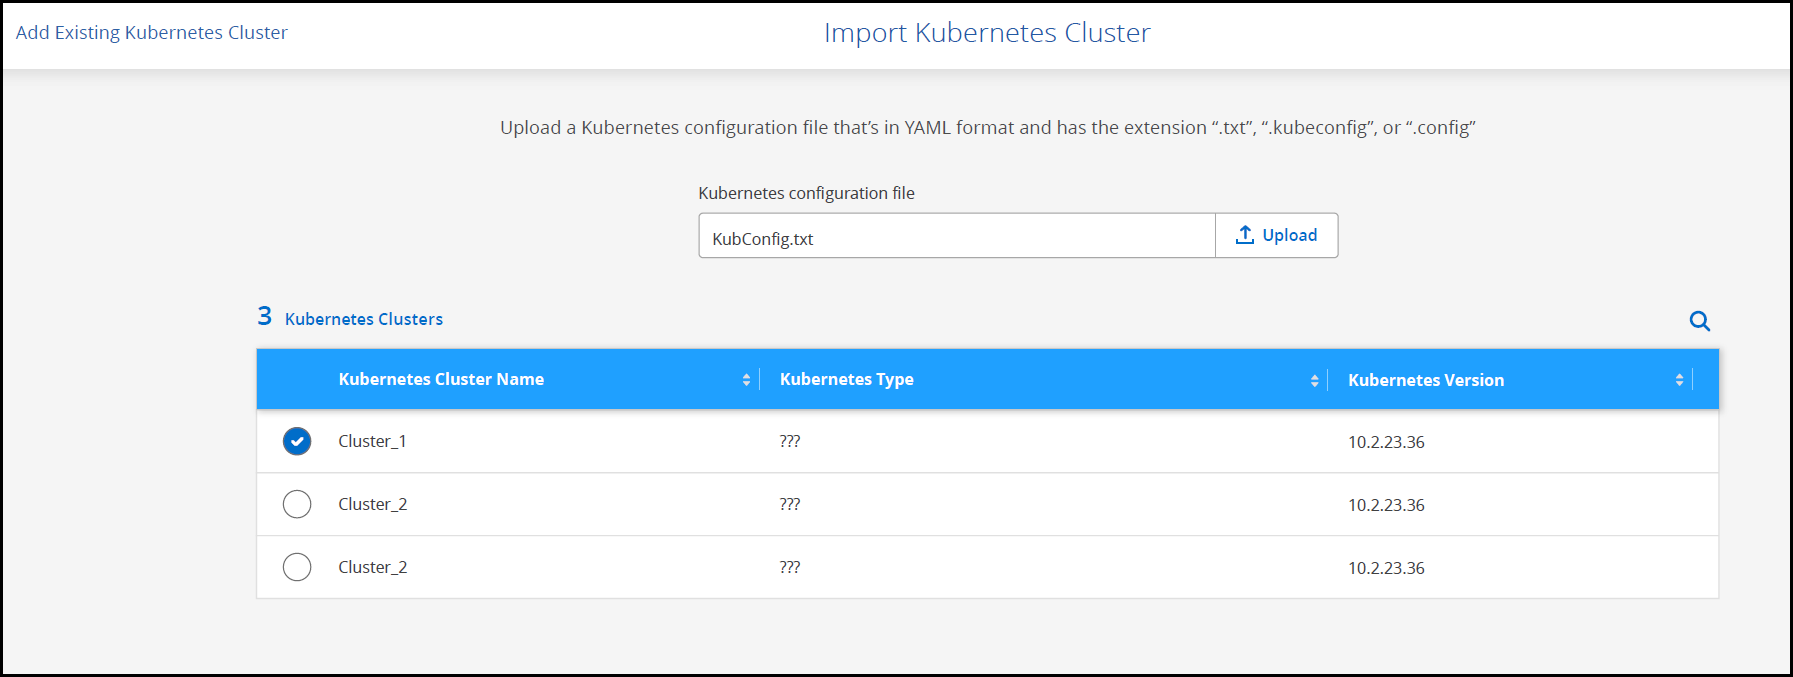 A screenshot of the import Kubernetes cluster page with configuration file and available clusters table.